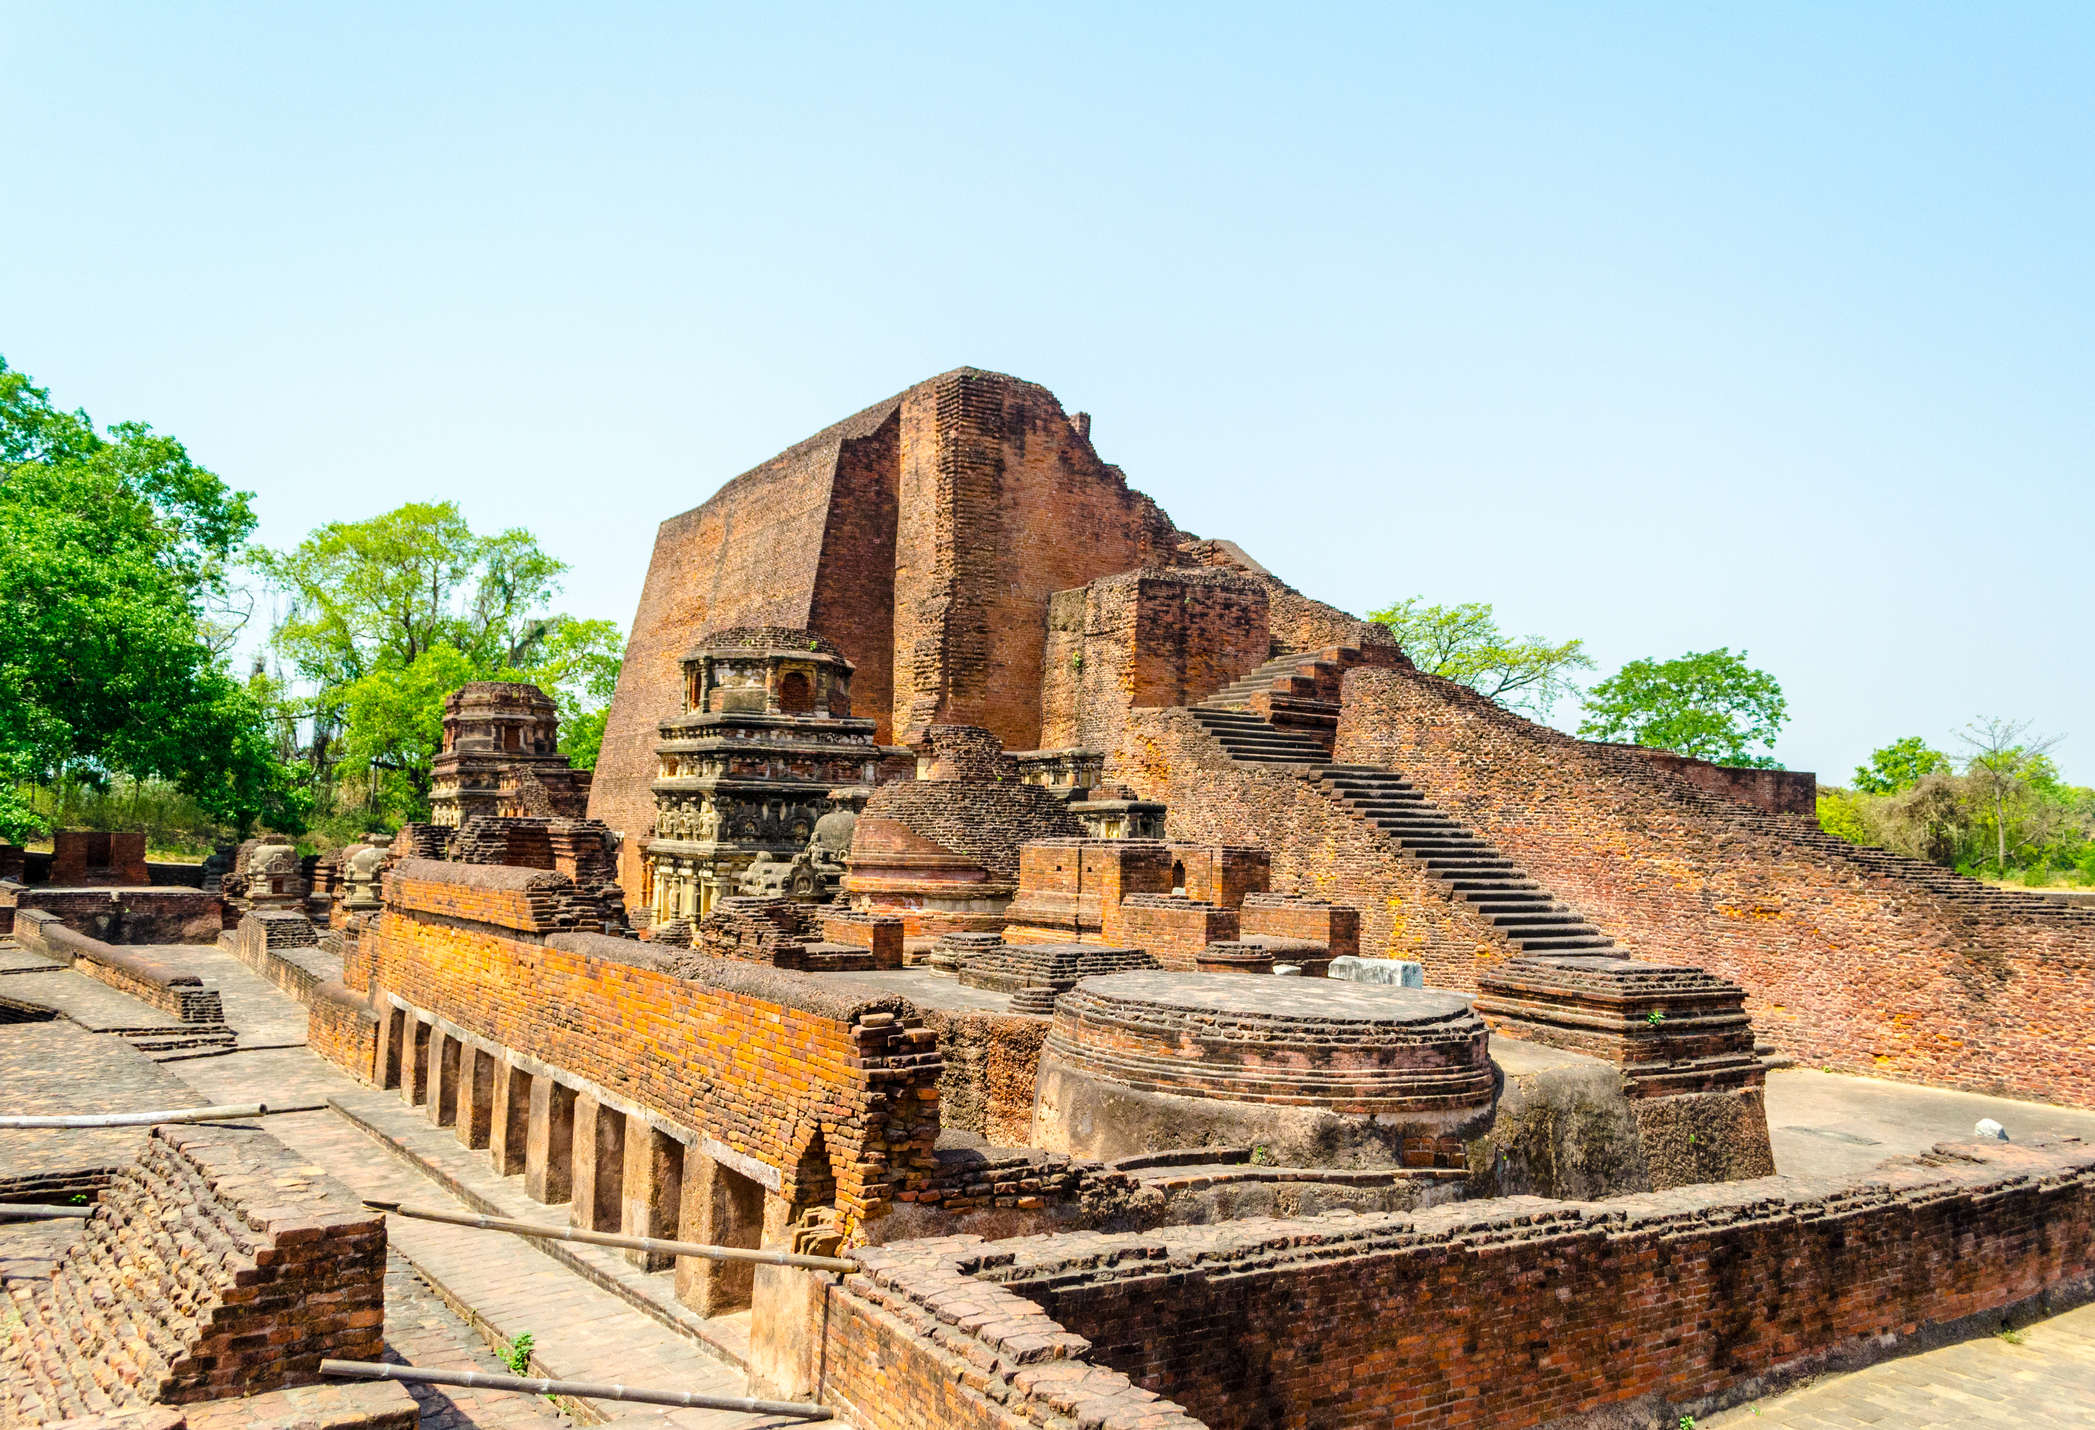 In a first, a hill-top Buddhist monastery discovered in Bihar